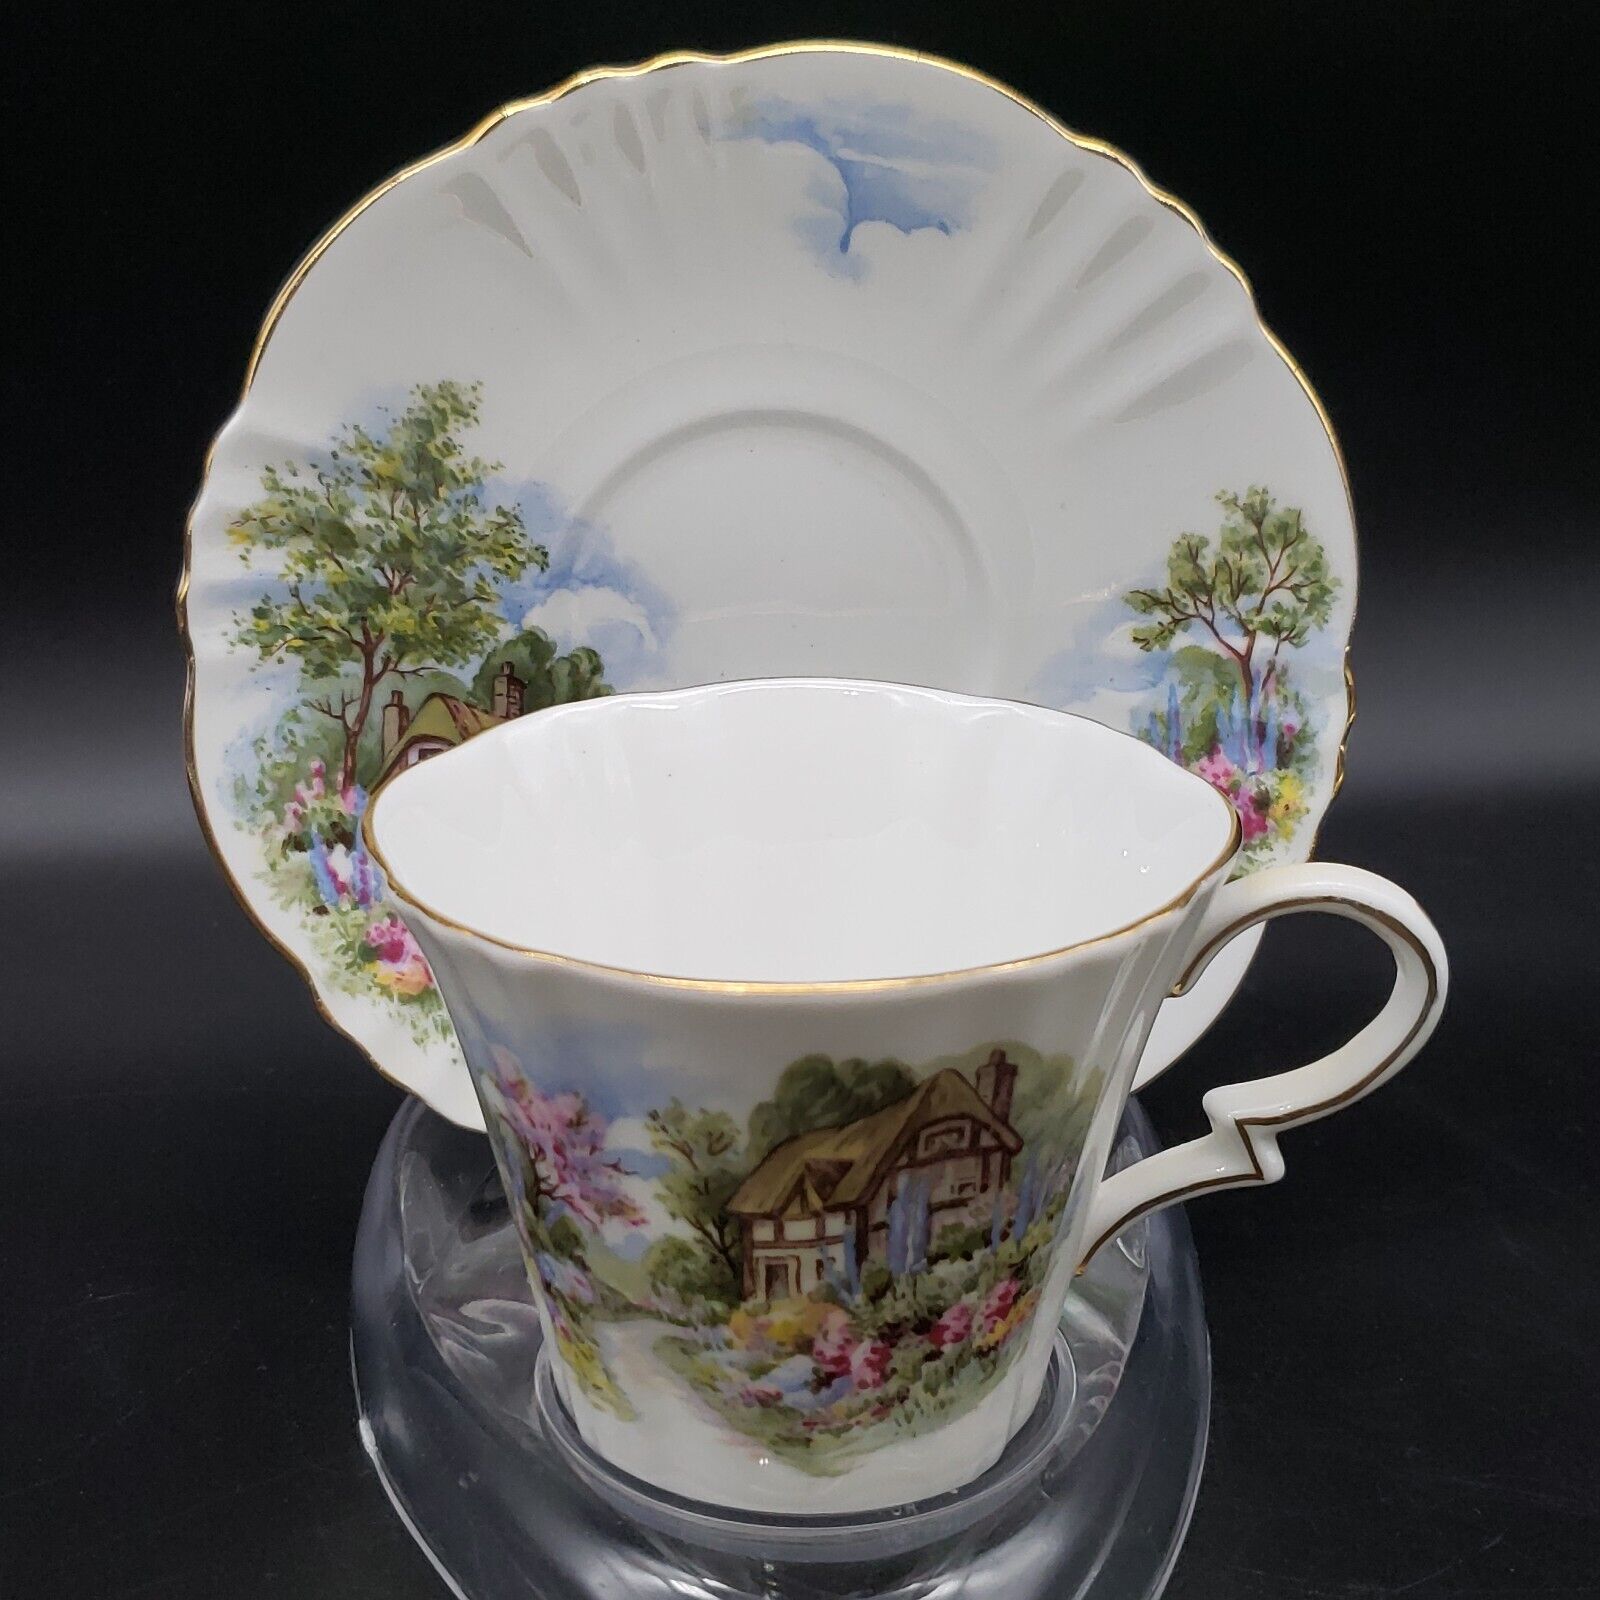 Vintage Royal Standard Fine Bone China Cup and Saucer Cottage and Garden Scene